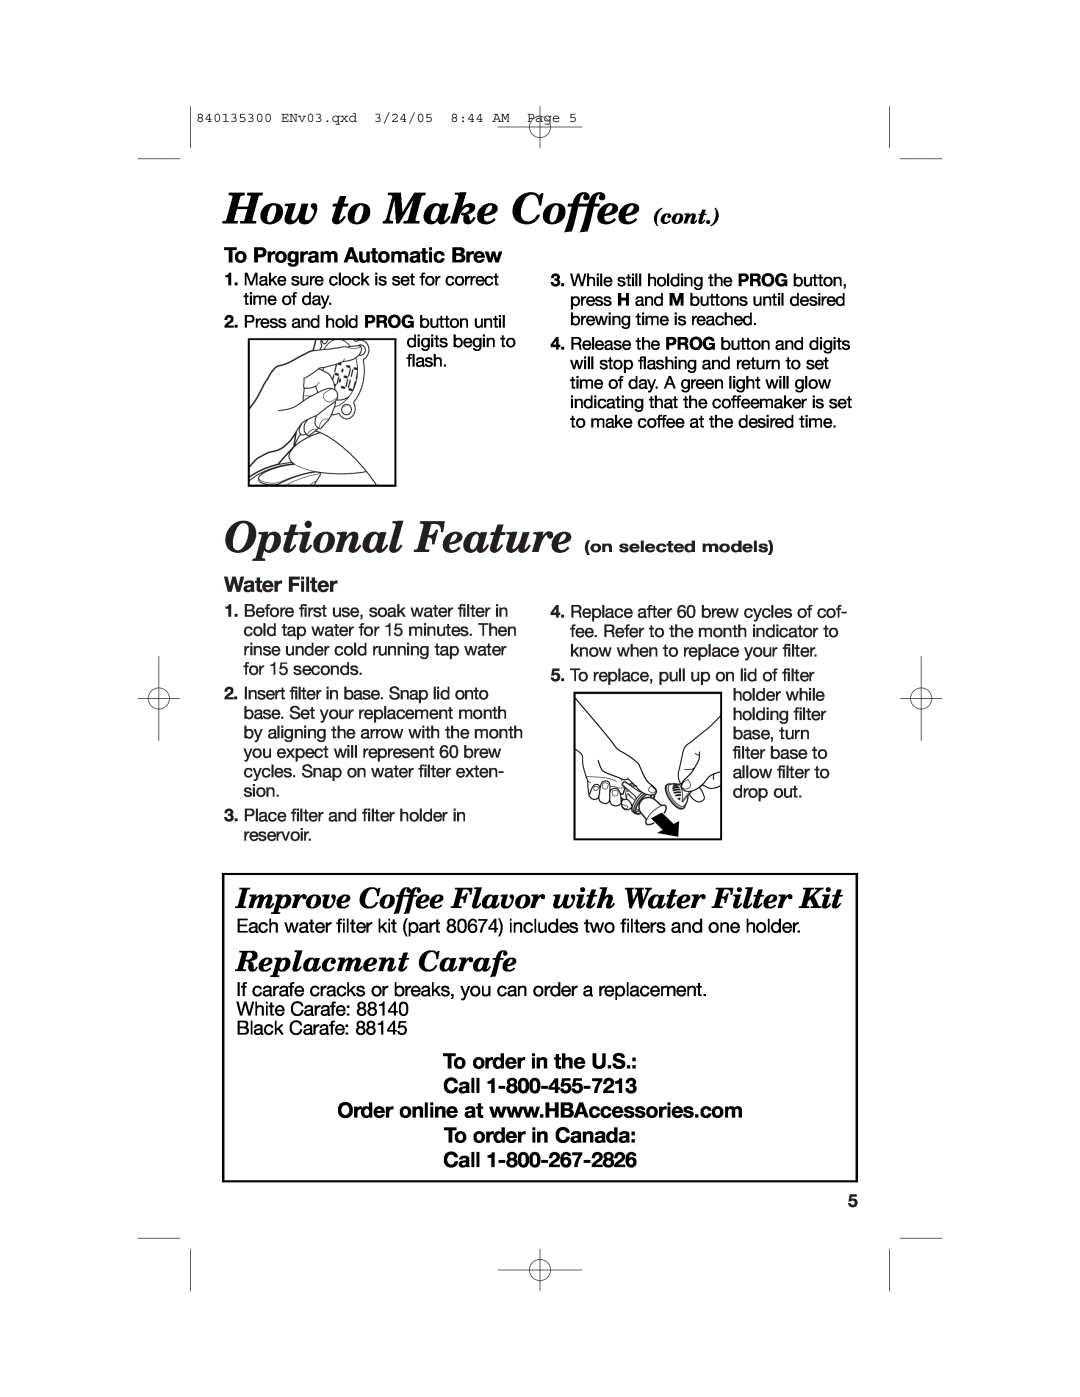 Hamilton Beach 42491, 840135300 How to Make Coffee cont, To Program Automatic Brew, Water Filter, To order in the U.S Call 